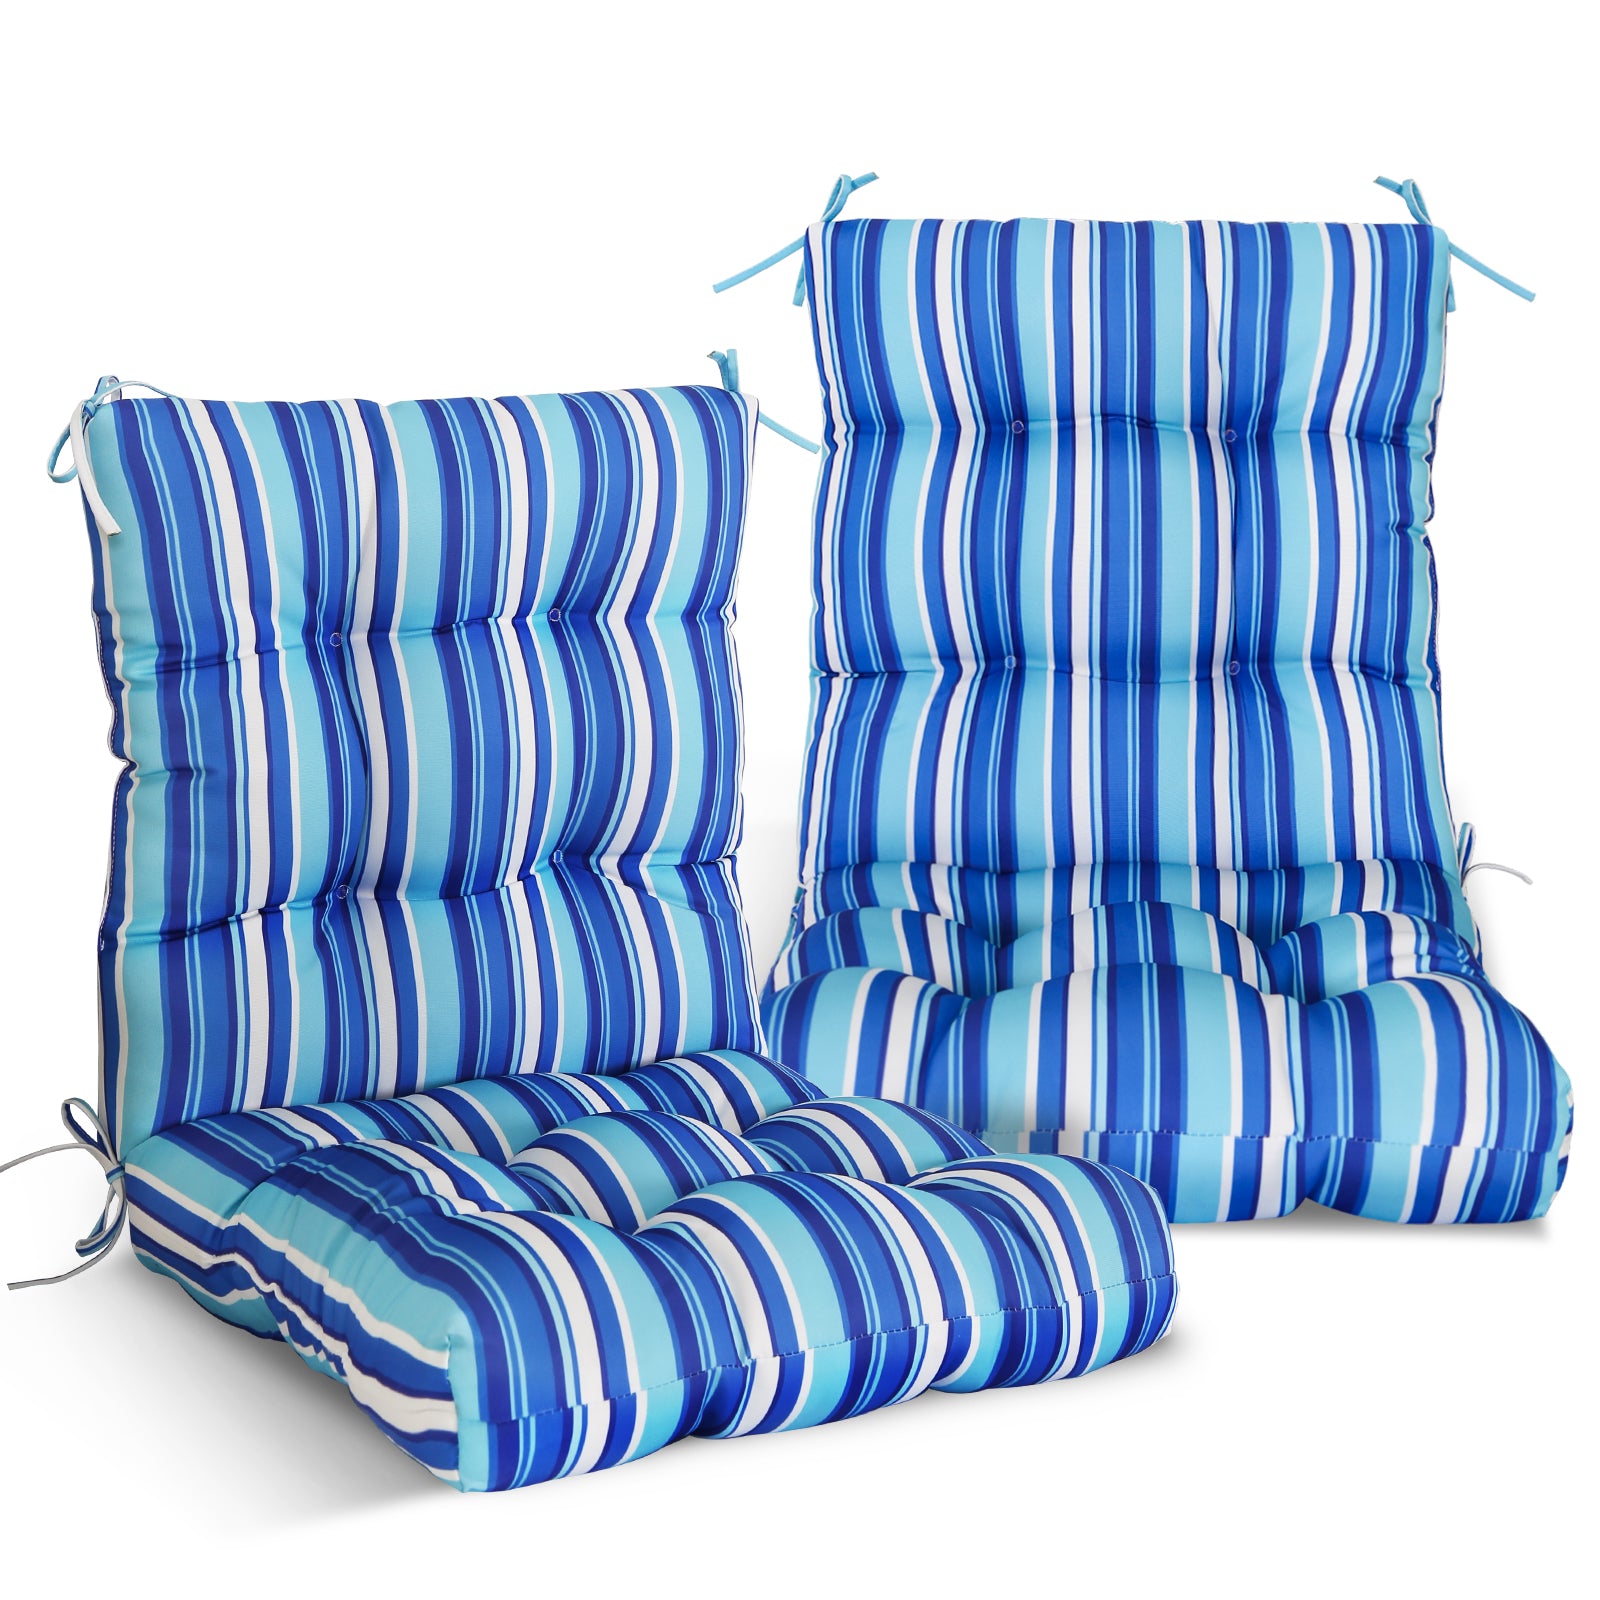 EAGLE PEAK Tufted Outdoor/Indoor Seat/Back Chair Cushion, Set of 2, 42